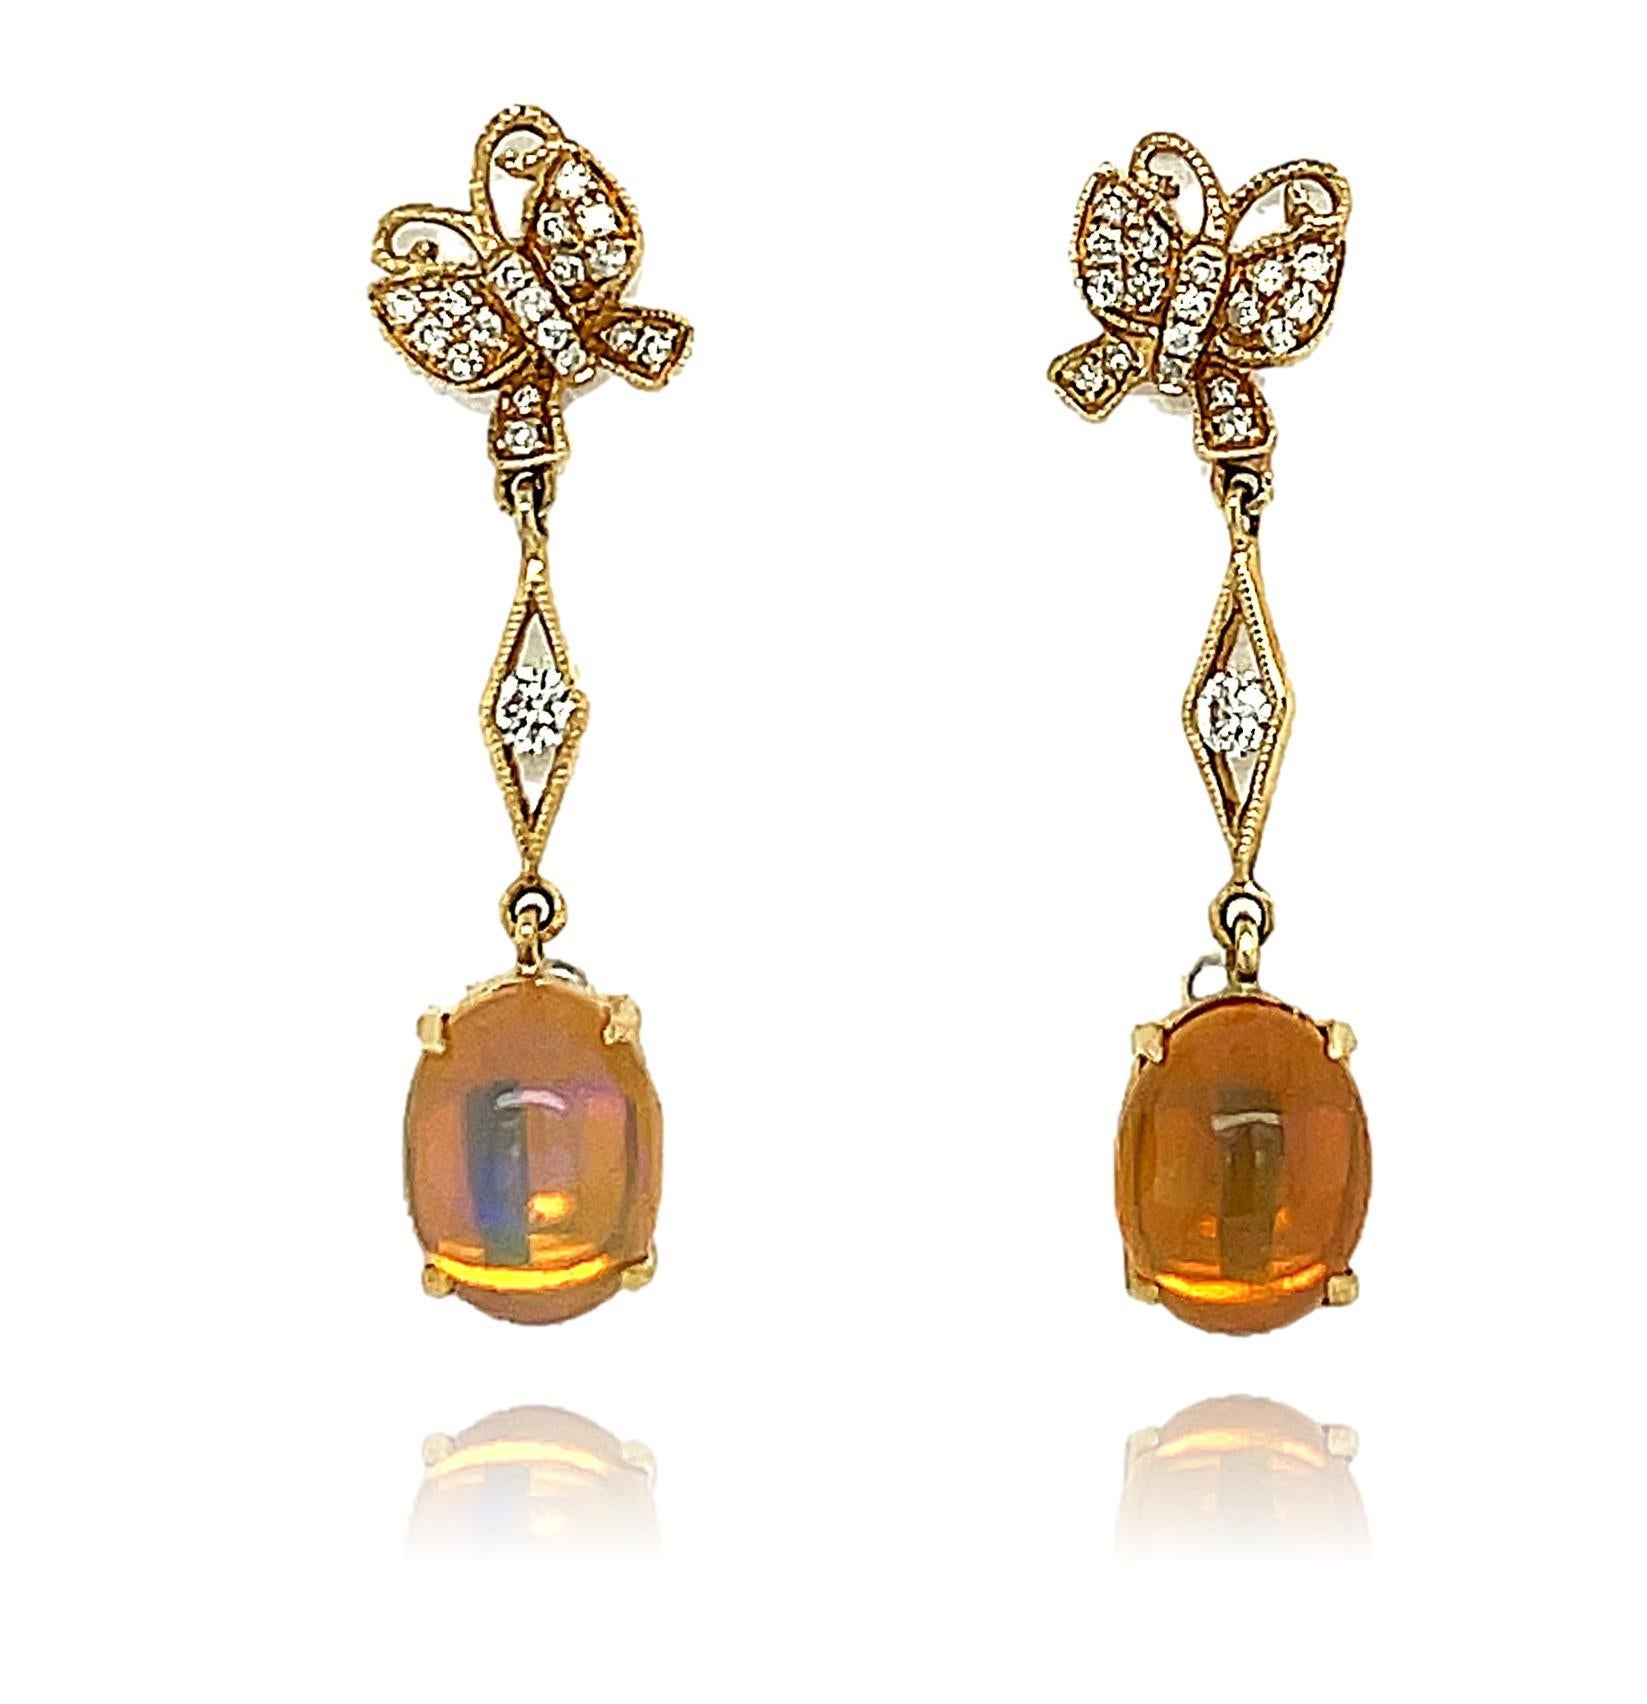 These stunning Ethiopian Opal and diamond dangling earrings are 4 prong set in 14 karat yellow gold. There are sparkling diamonds scattered throughout for a beautiful accent. These earrings are approximately 1.25